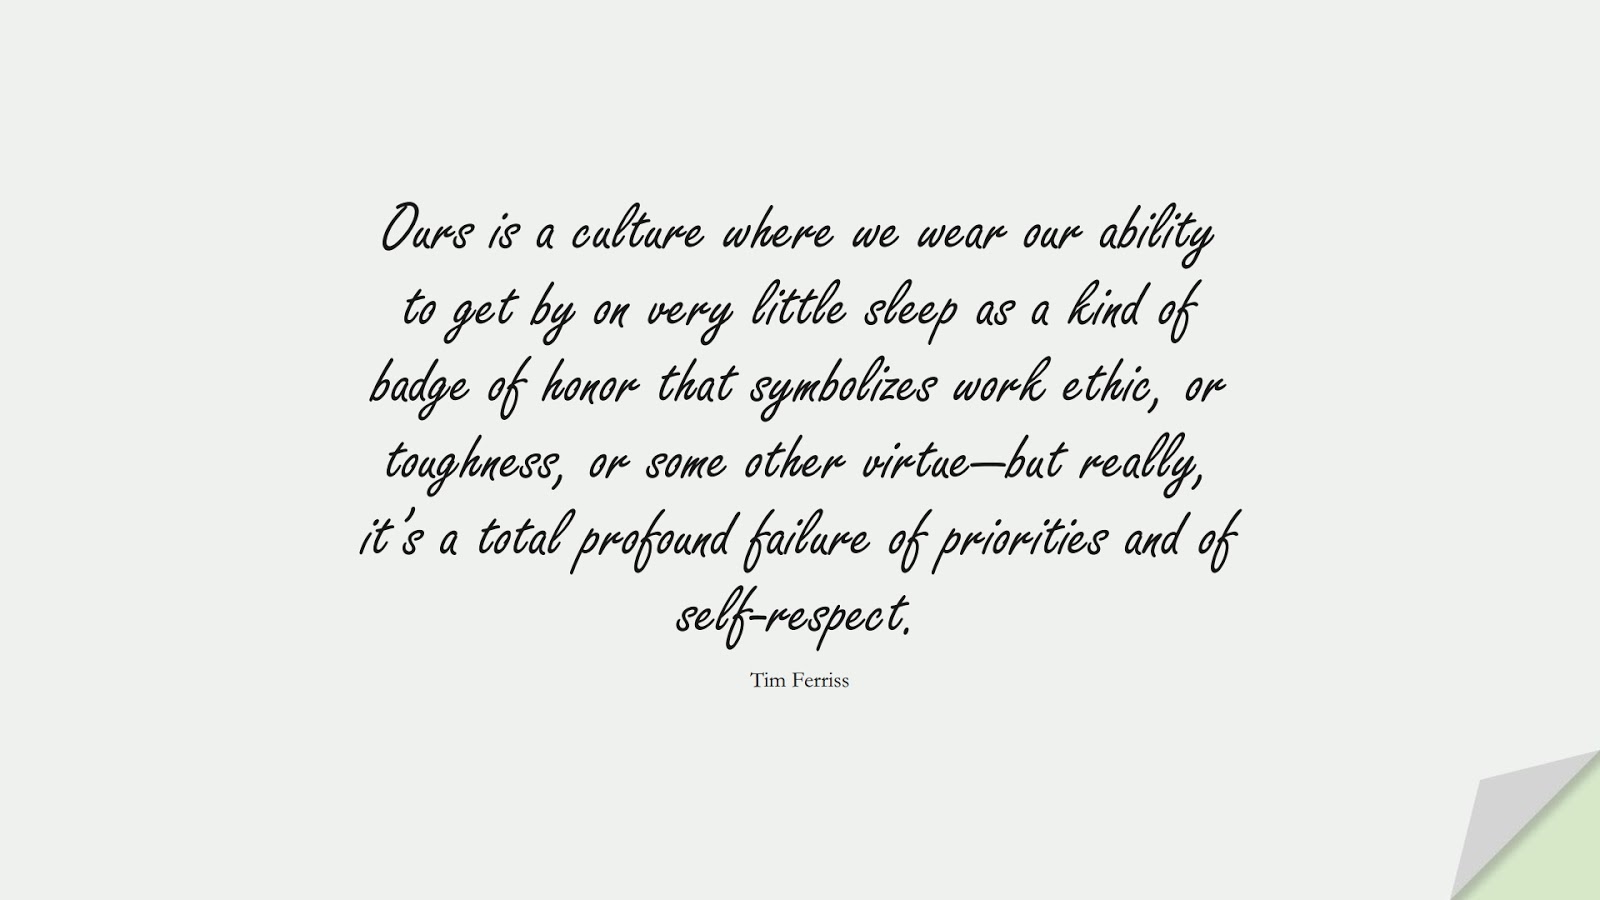 Ours is a culture where we wear our ability to get by on very little sleep as a kind of badge of honor that symbolizes work ethic, or toughness, or some other virtue—but really, it’s a total profound failure of priorities and of self-respect. (Tim Ferriss);  #TimFerrissQuotes